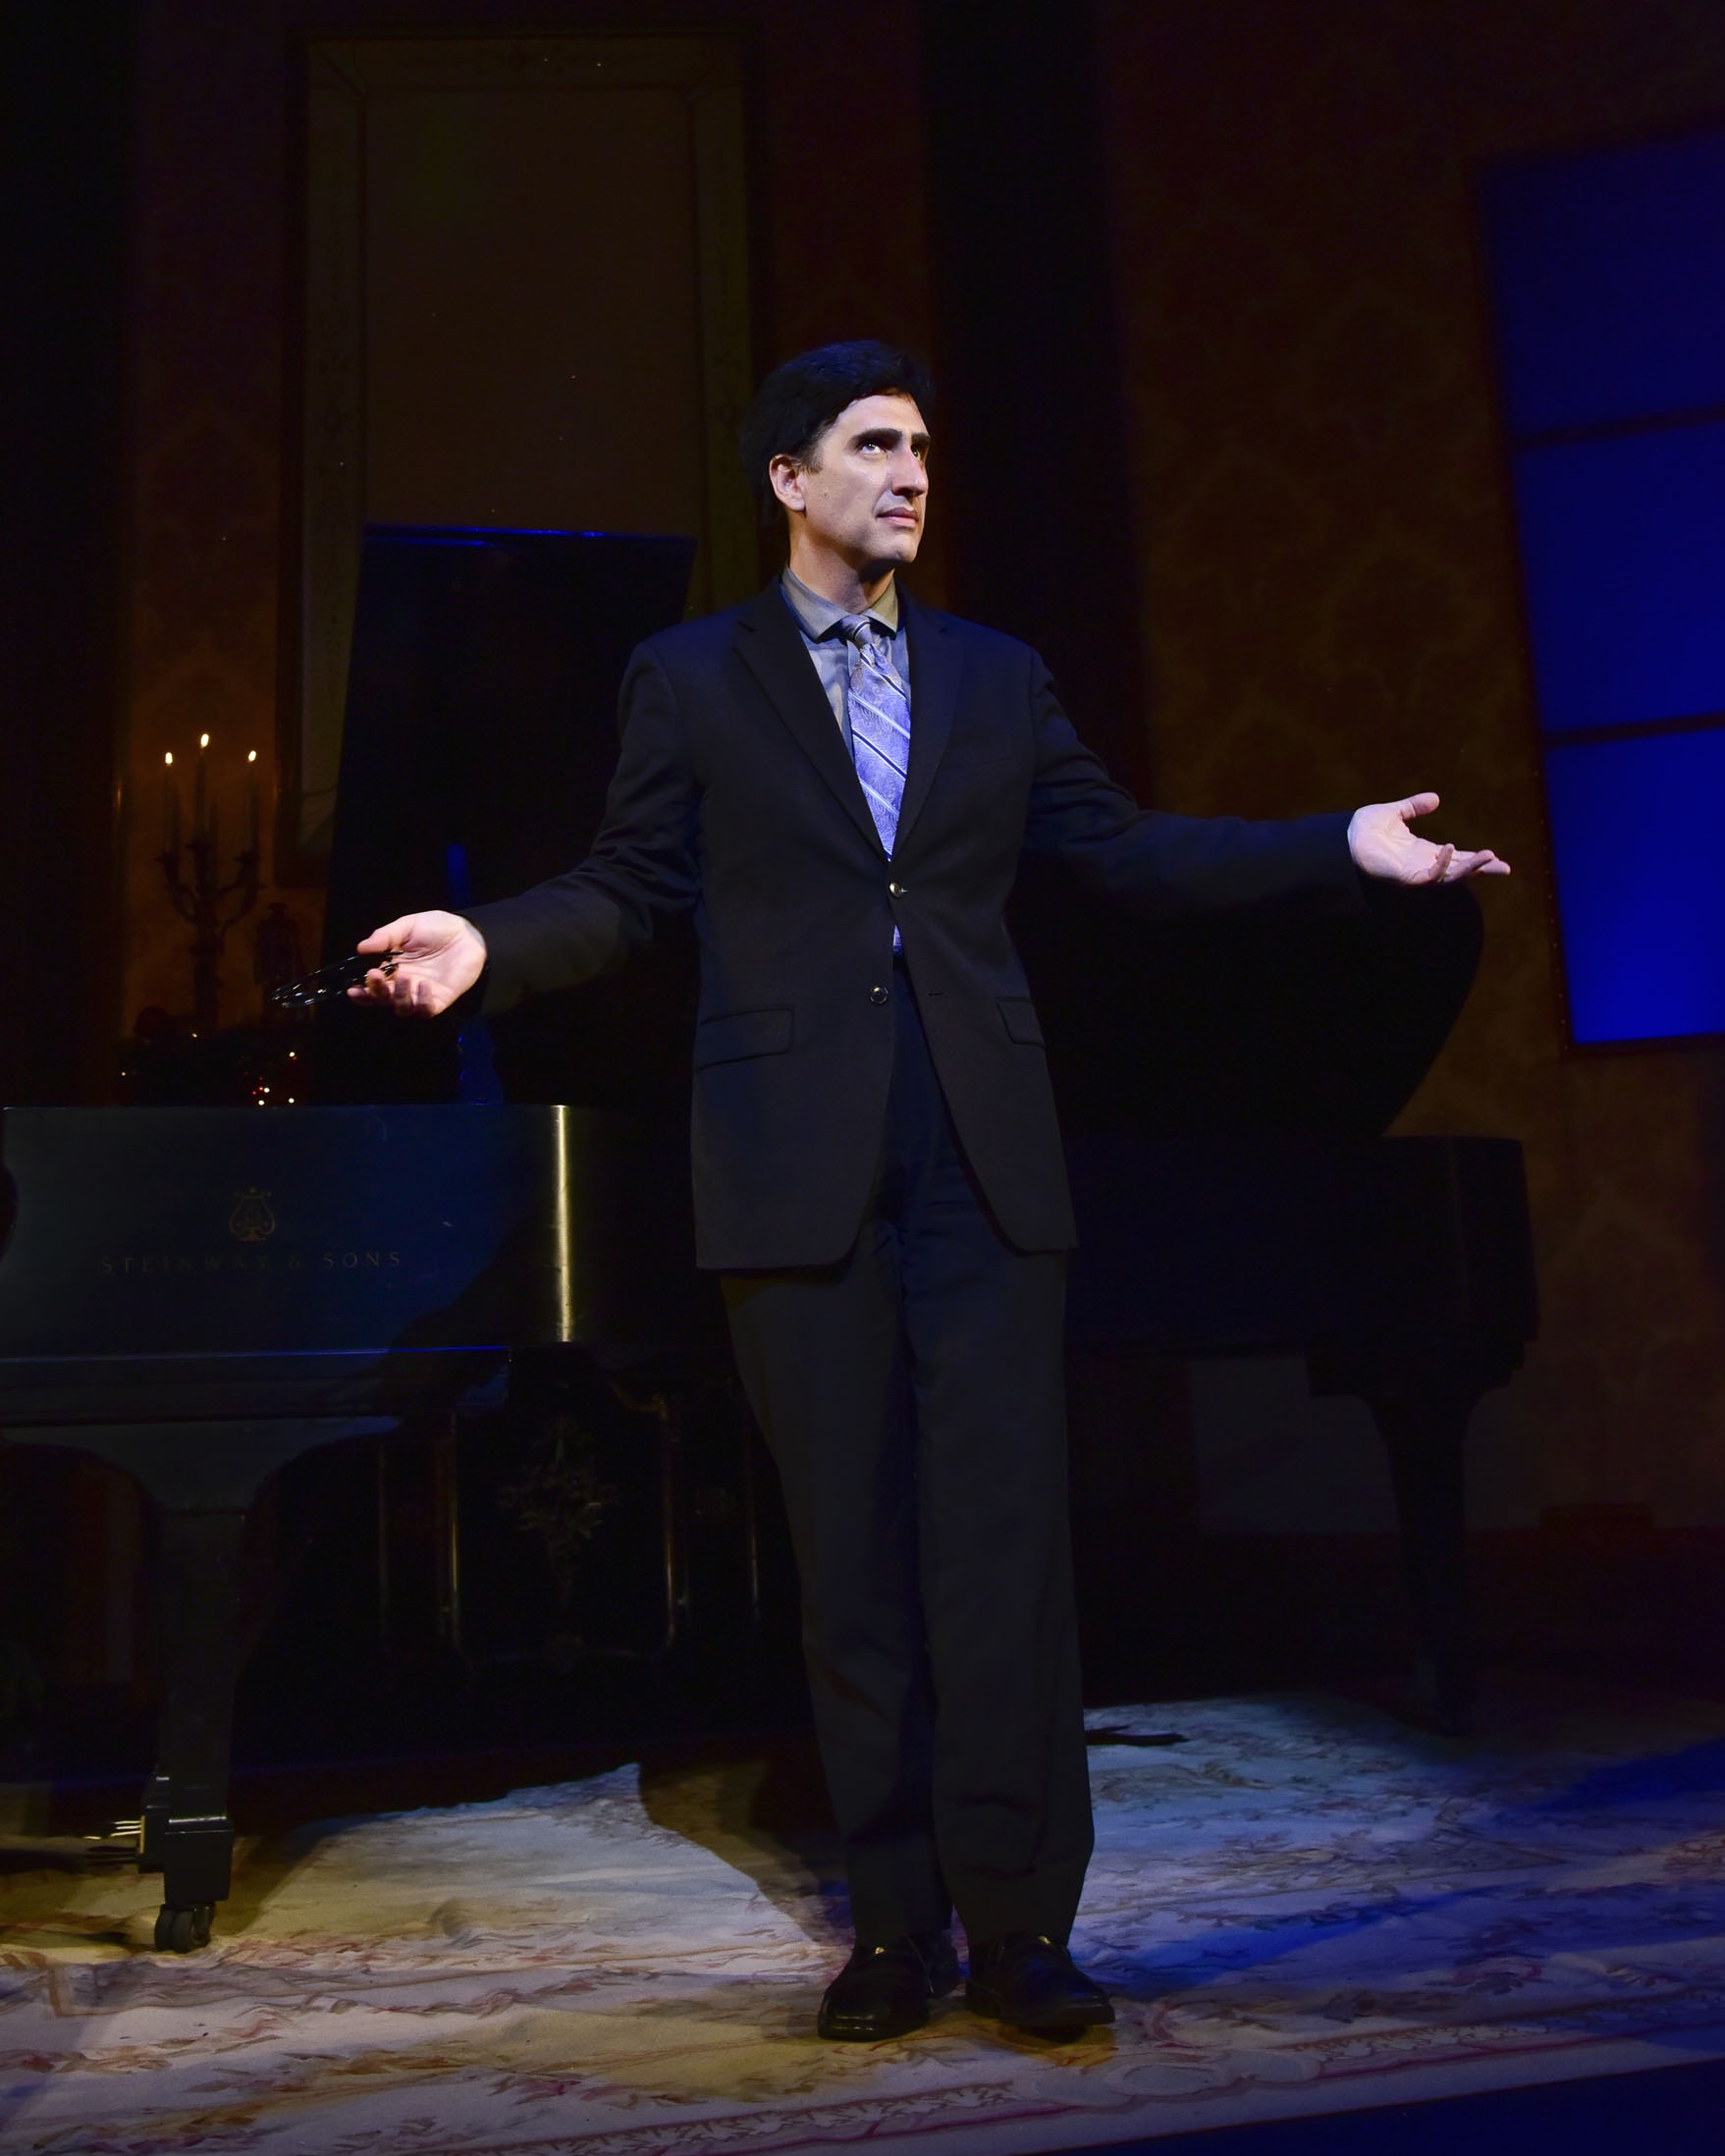 NEW YORK, NY - JUNE 06: Hershey Felder As Irving Berlin At TheTown Hall, NYC - June 6 on June 6, 2016 in New York City. (Photo by Eugene Gologursky/Getty Images for Hersehey Felder)